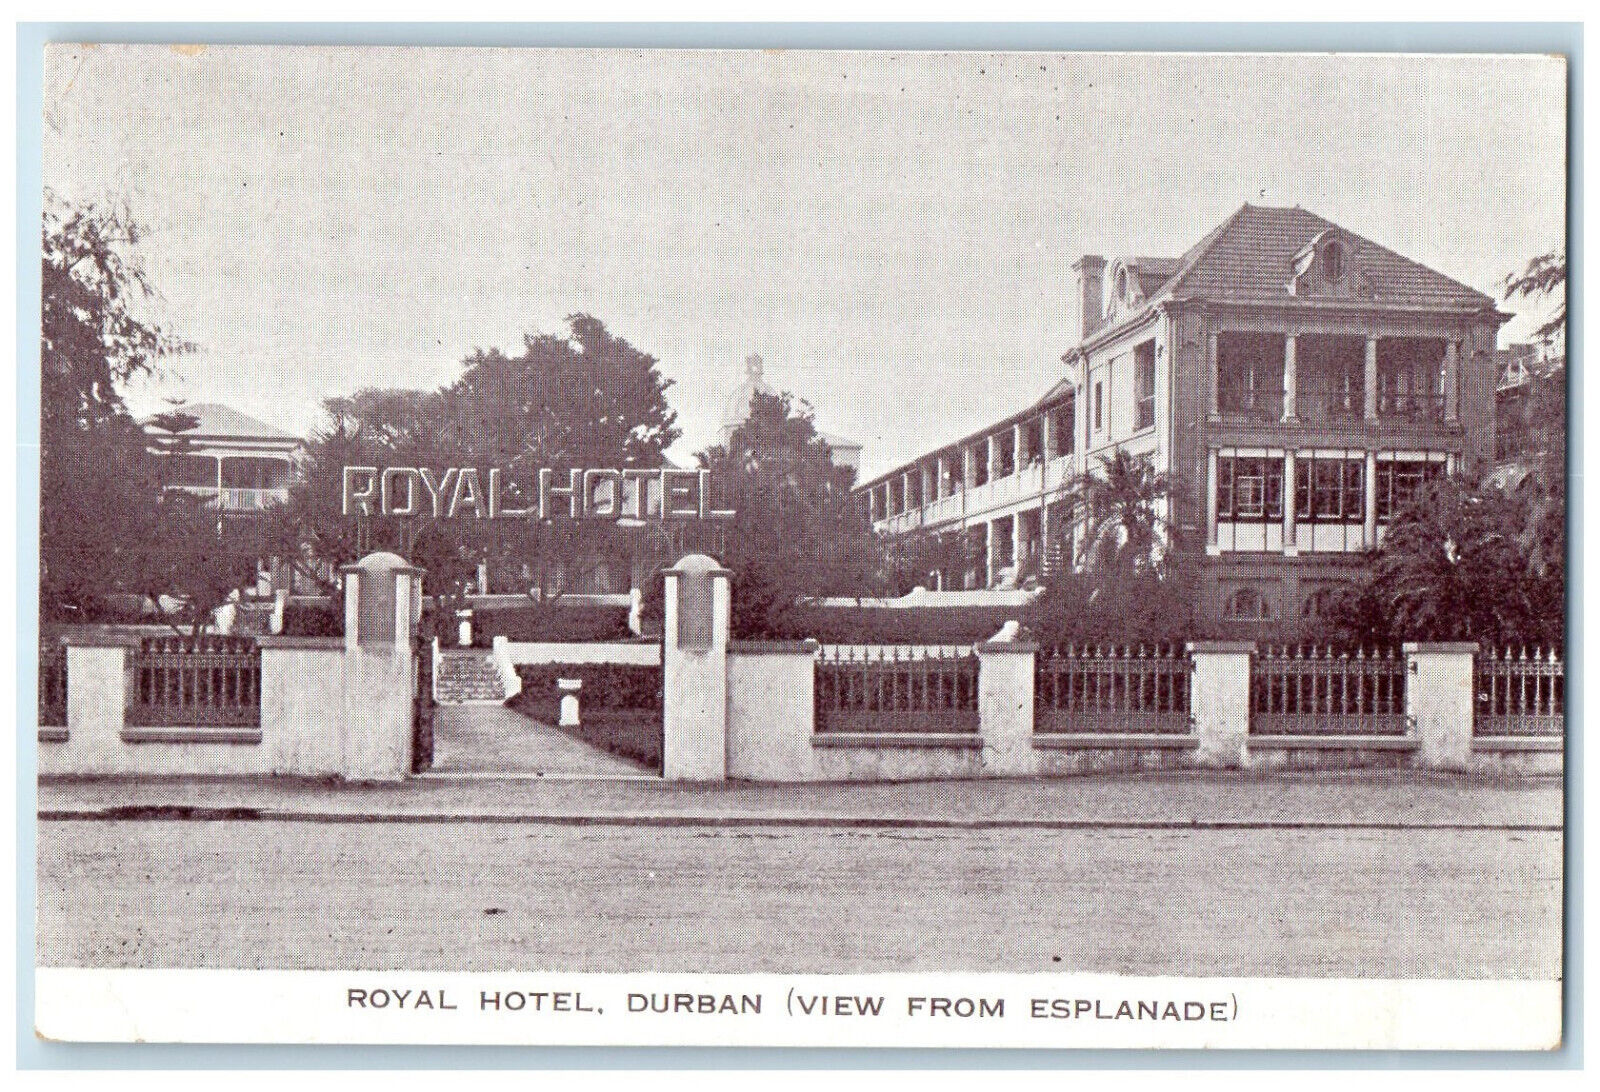 c1910 Royal Hotel Durban (View from Esplanade) South Africa Antique Postcard